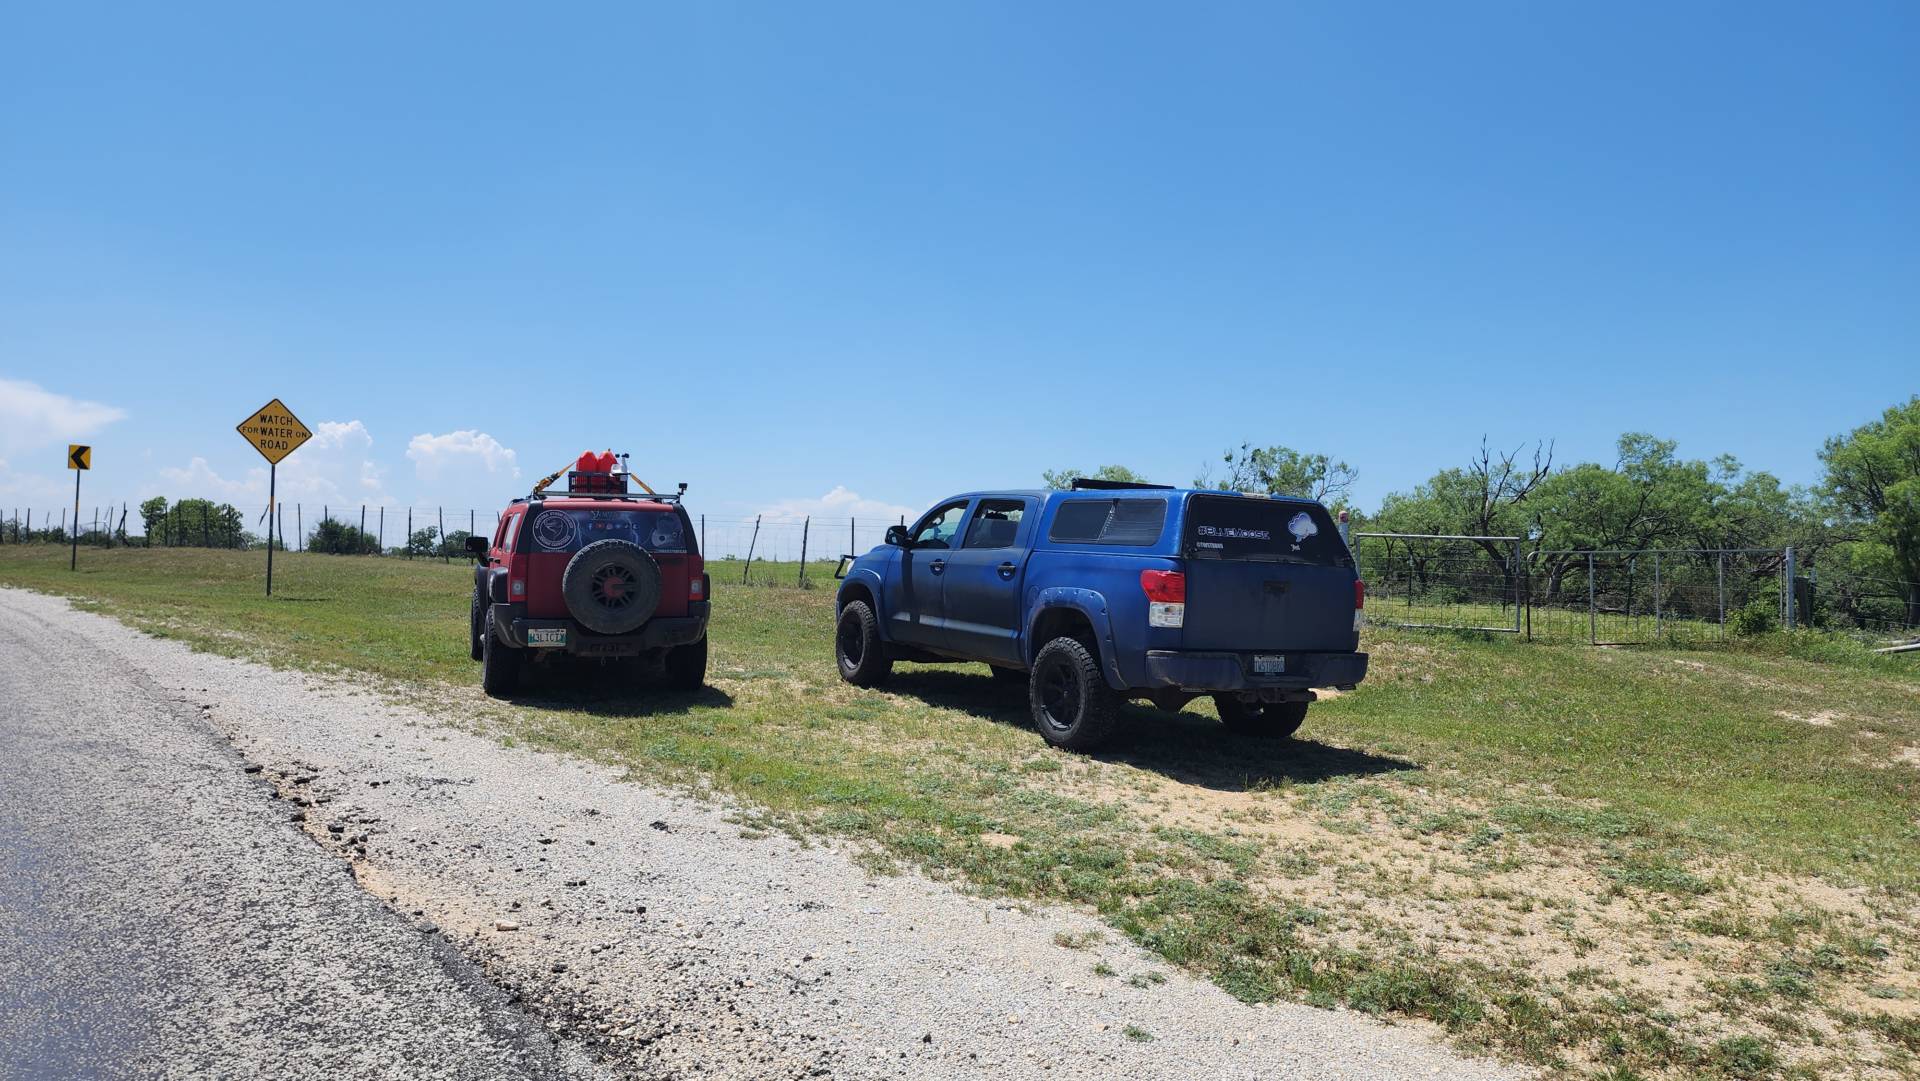 #H3LICITY and #BLUEMOOSE Sitting pretty near Comanche, Texas  waiting for storm development, we are live tracking on Highways & Hailstones so come follow along! 02:22 PM @NWSFortWorth #txwx